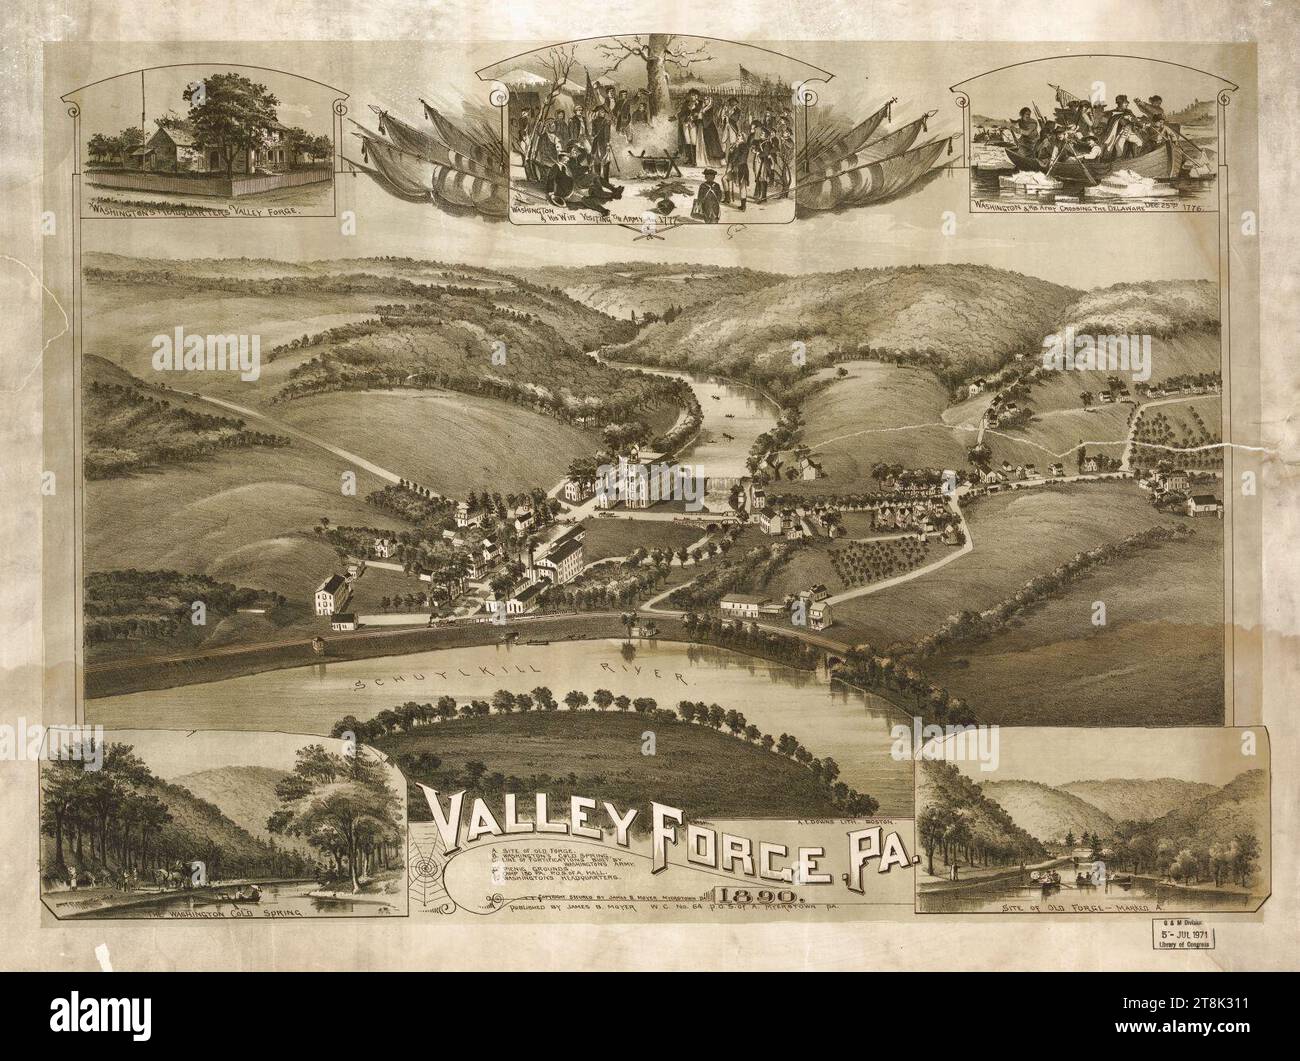 Valley Forge, Pennsylvanie 1890. Banque D'Images